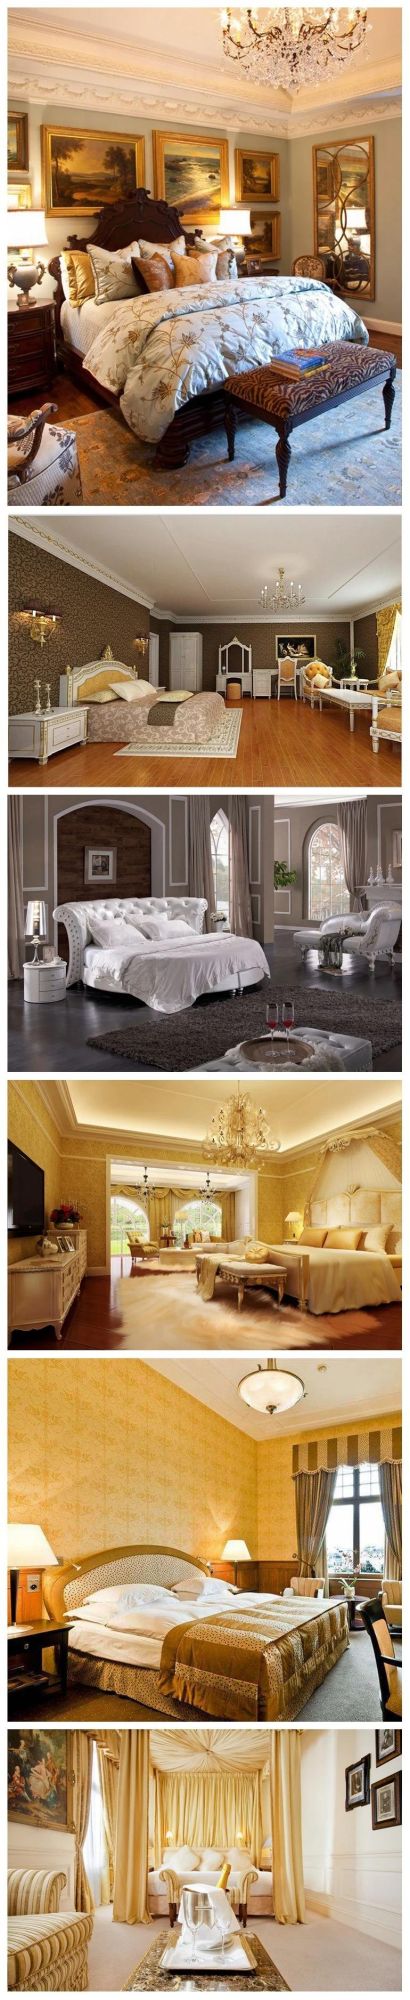 Royal Luxury Style Hotel Bedroom Furniture Sets for 5 Stars Hotel